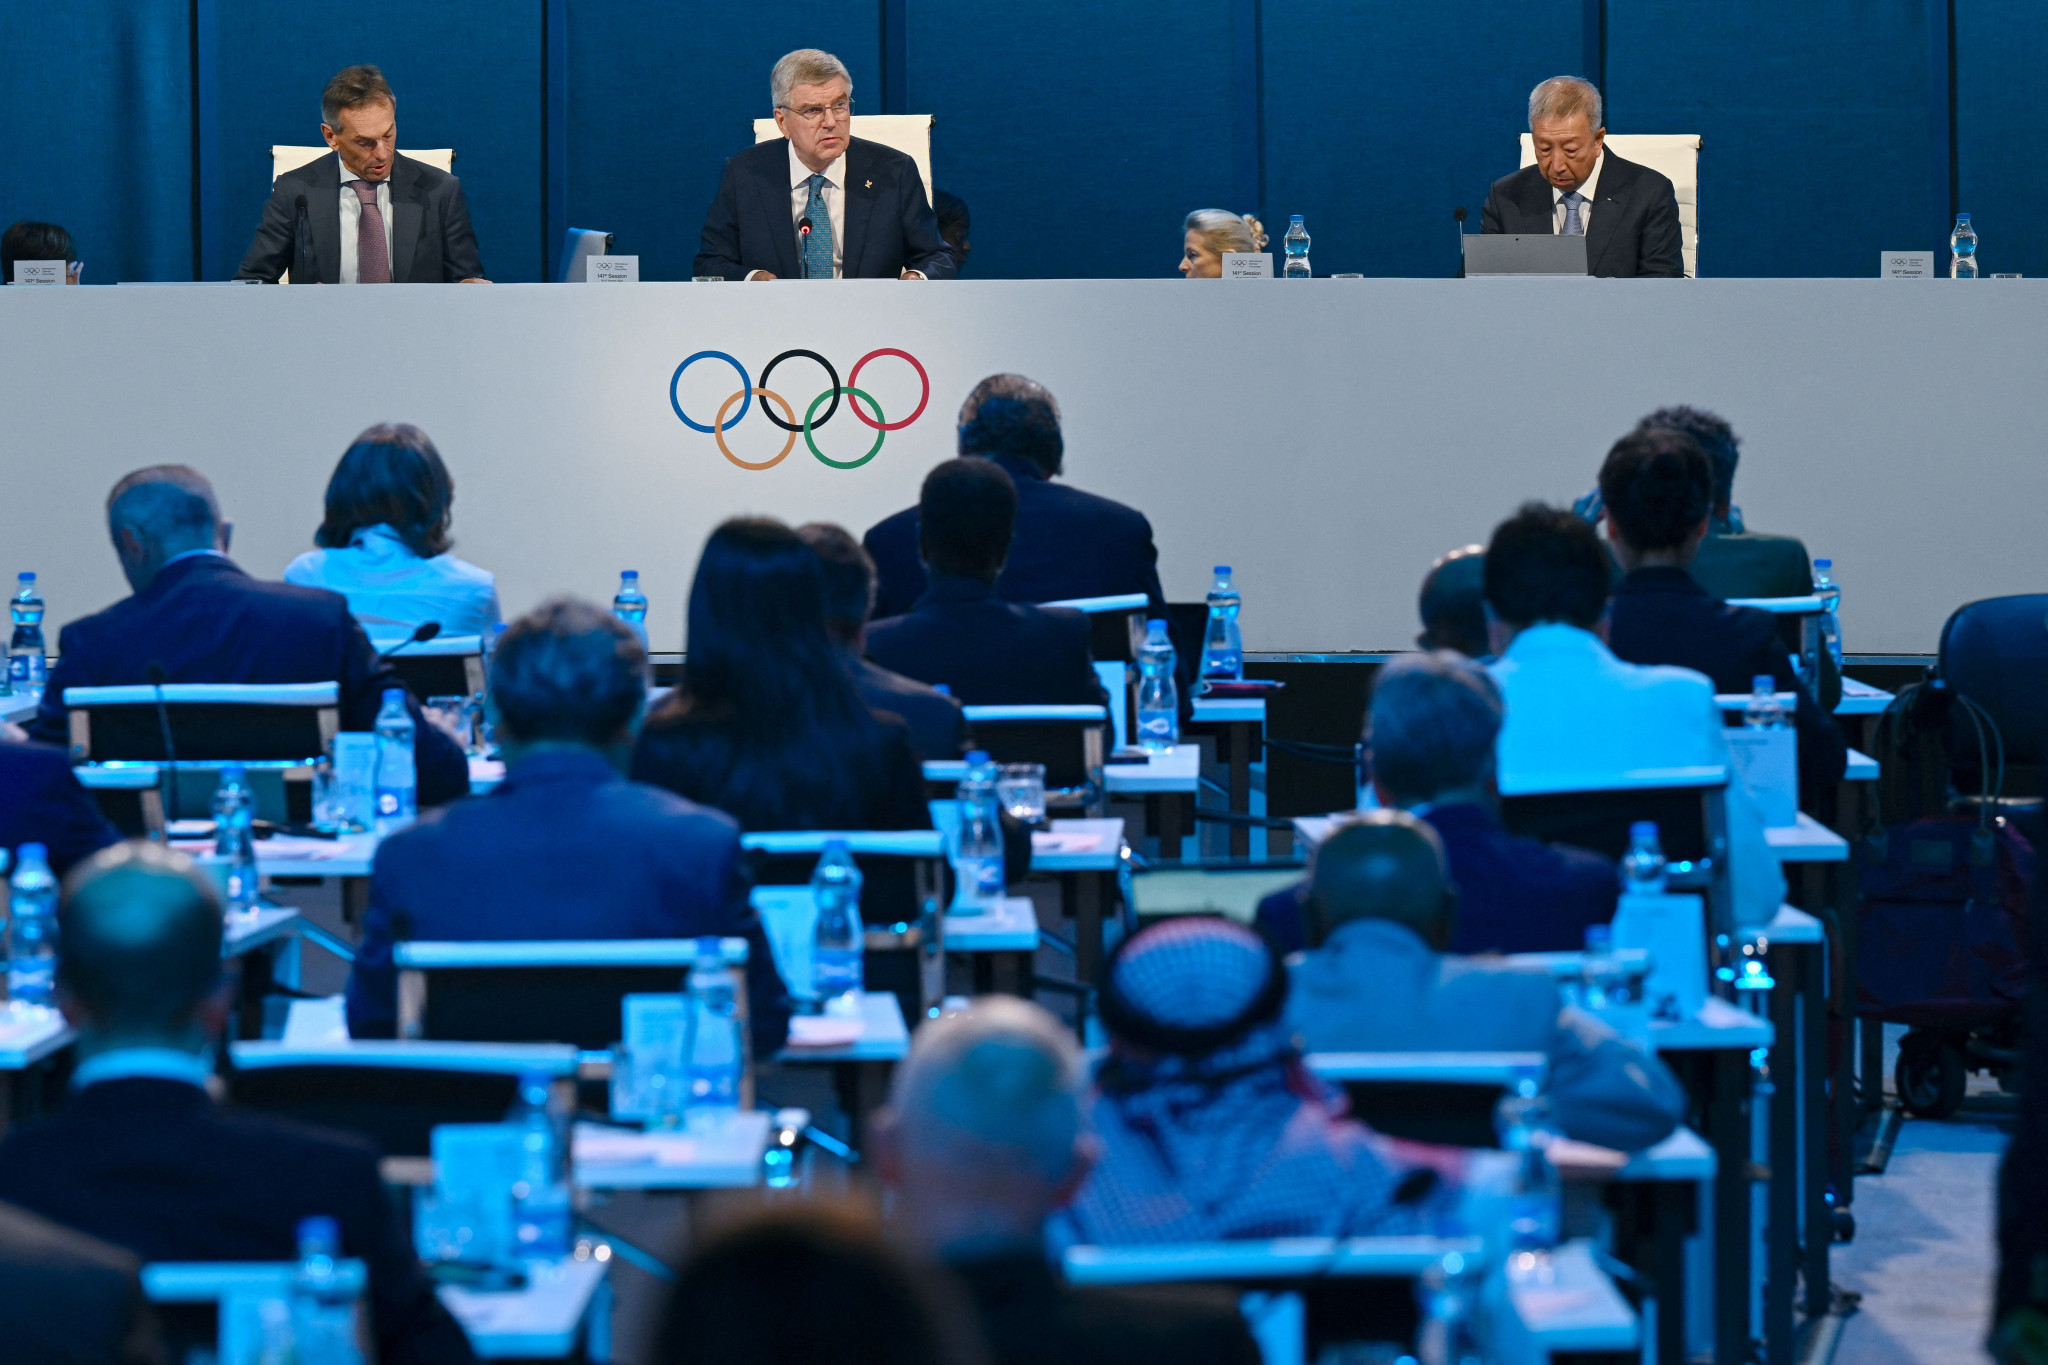 Algeria's Mustapha Berraf first raised the possibility of changing the Olympic Charter that would allow Thomas Bach to stay on as IOC President beyond 2025 when his current mandate ends ©Getty Images